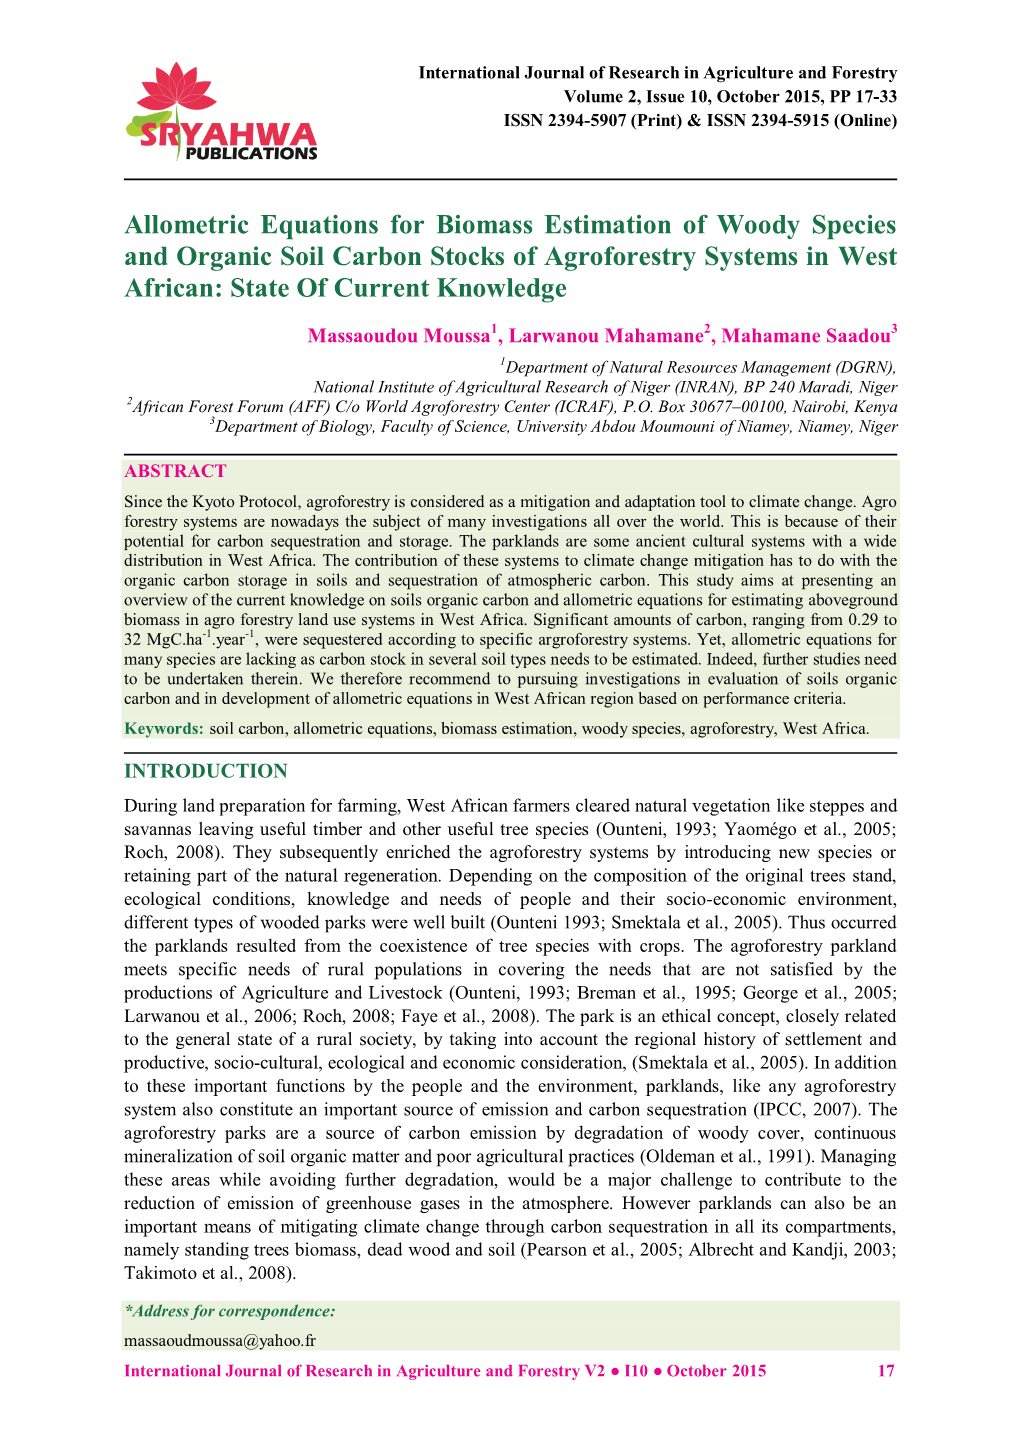 Allometric Equations for Biomass Estimation of Woody Species and Organic Soil Carbon Stocks of Agroforestry Systems in West African: State of Current Knowledge